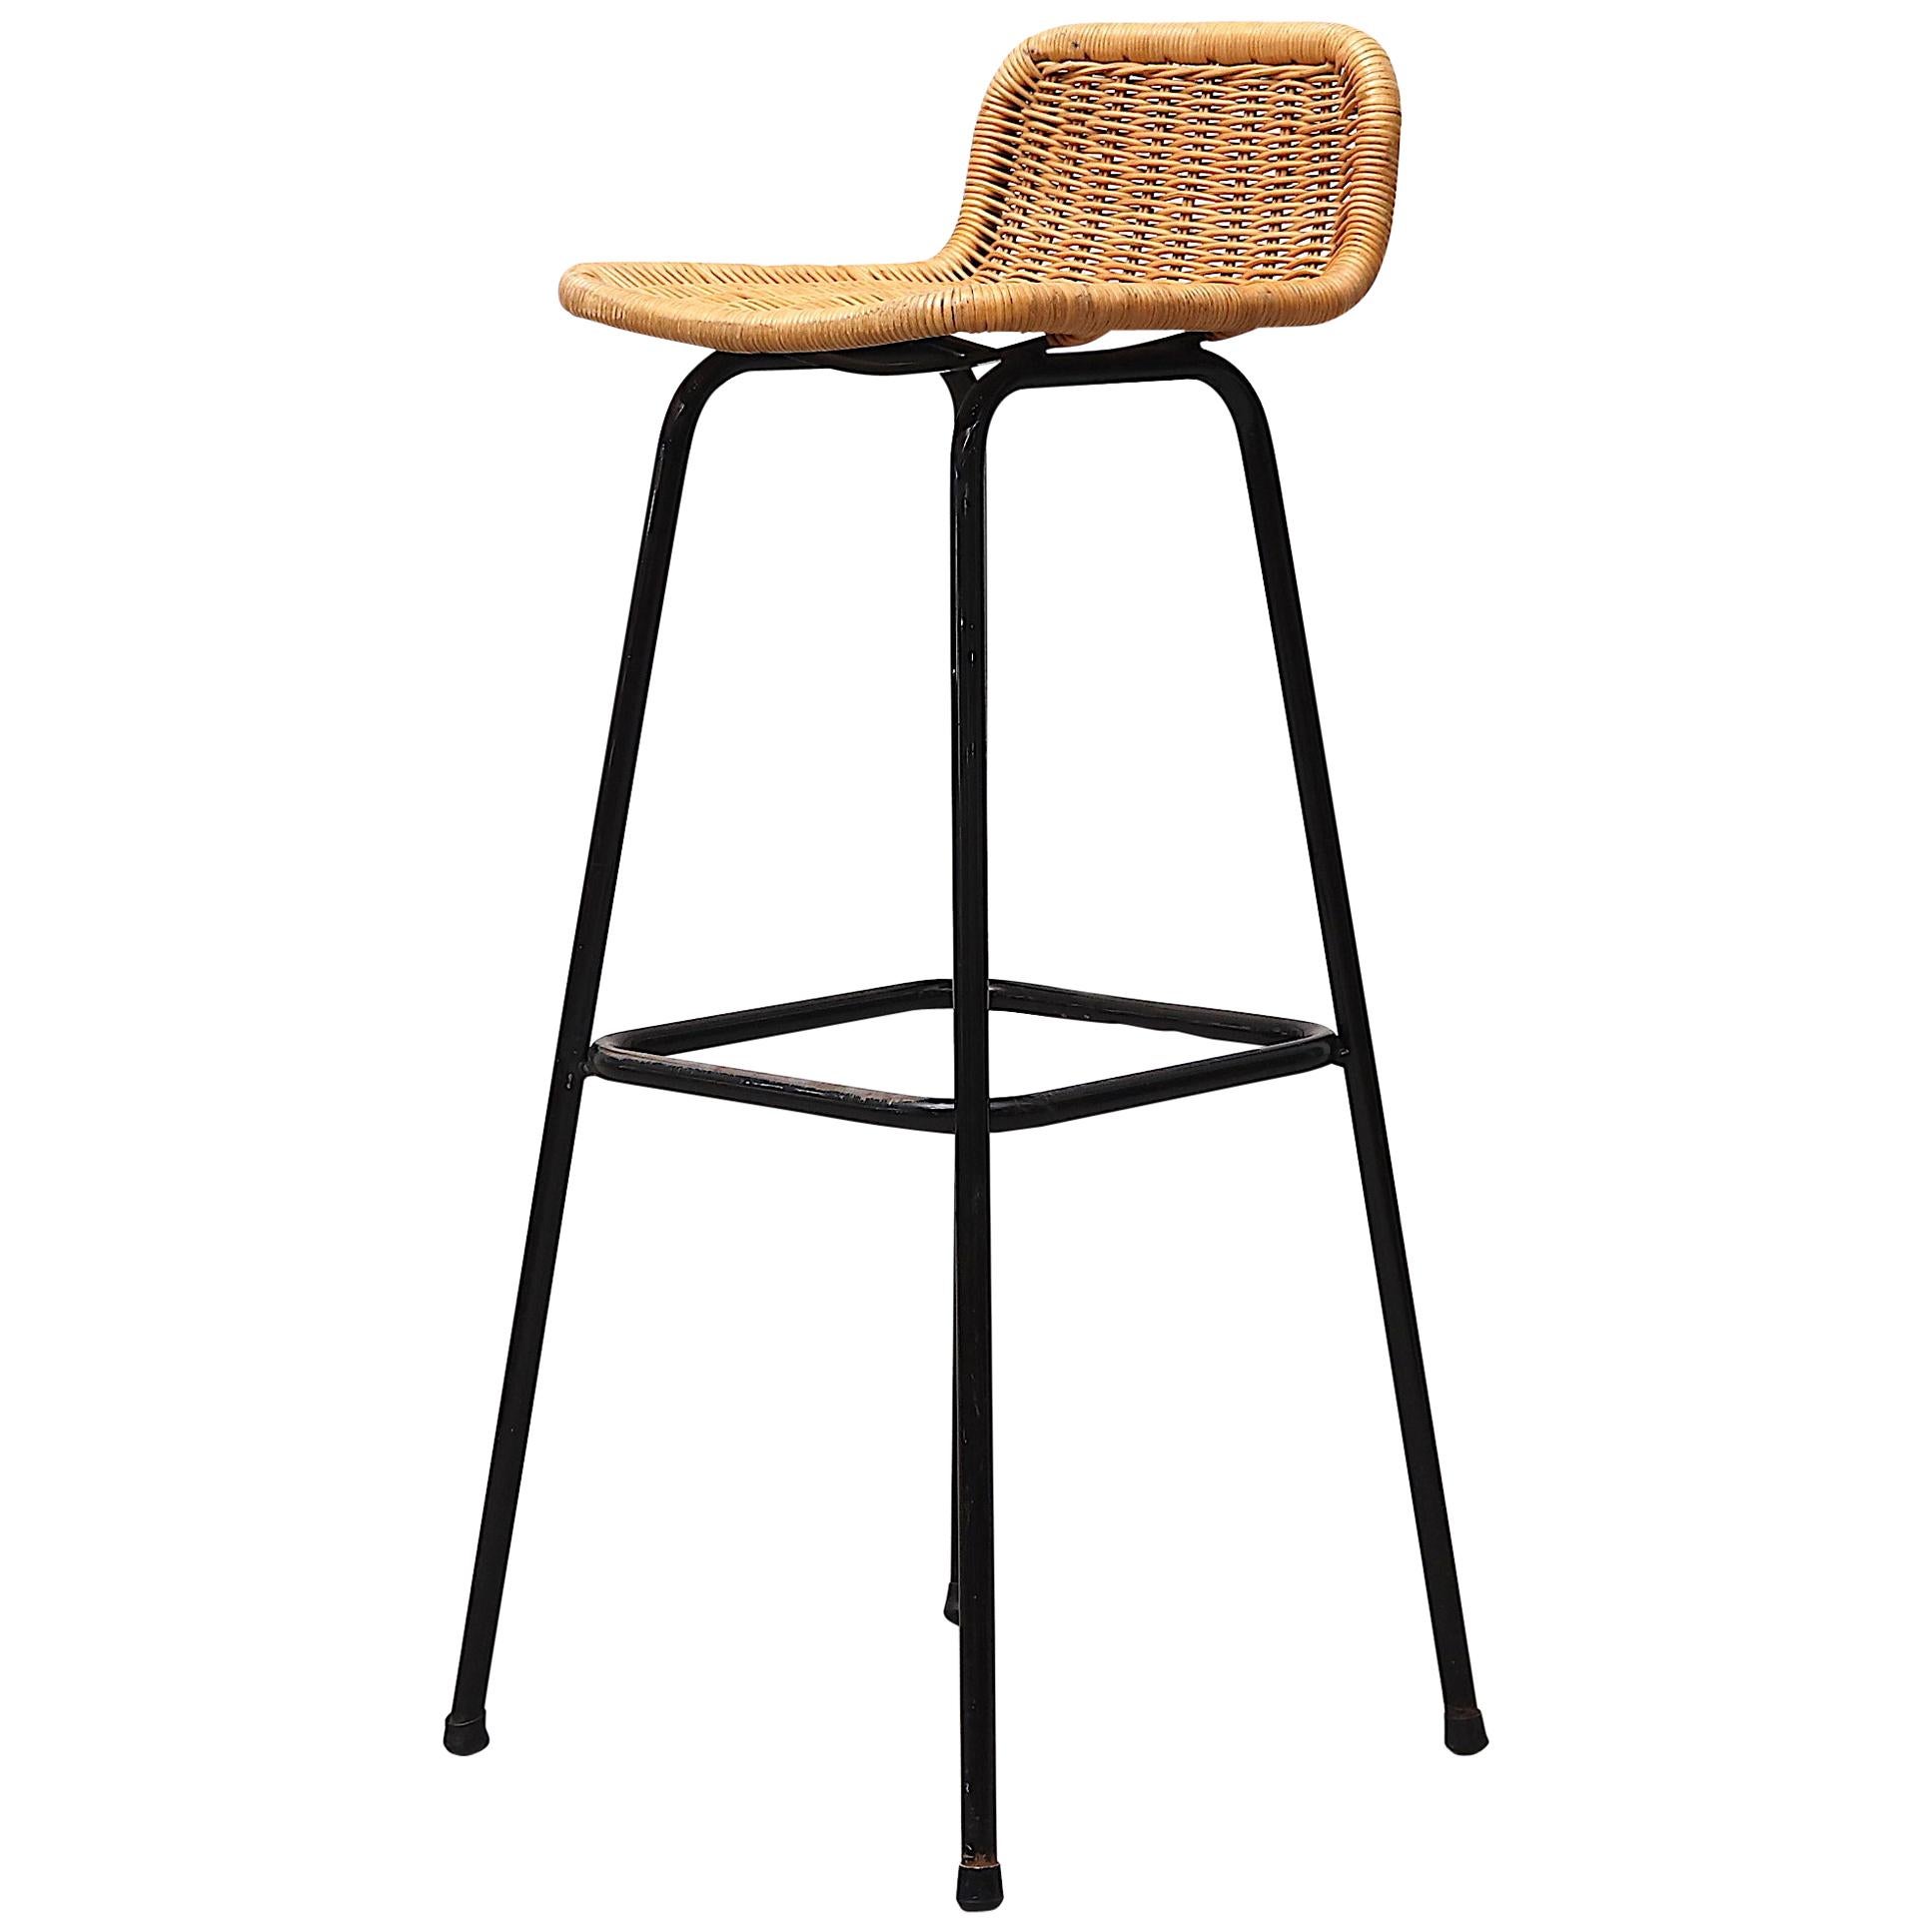 Charlotte Perriand Style Wicker Bar Stool